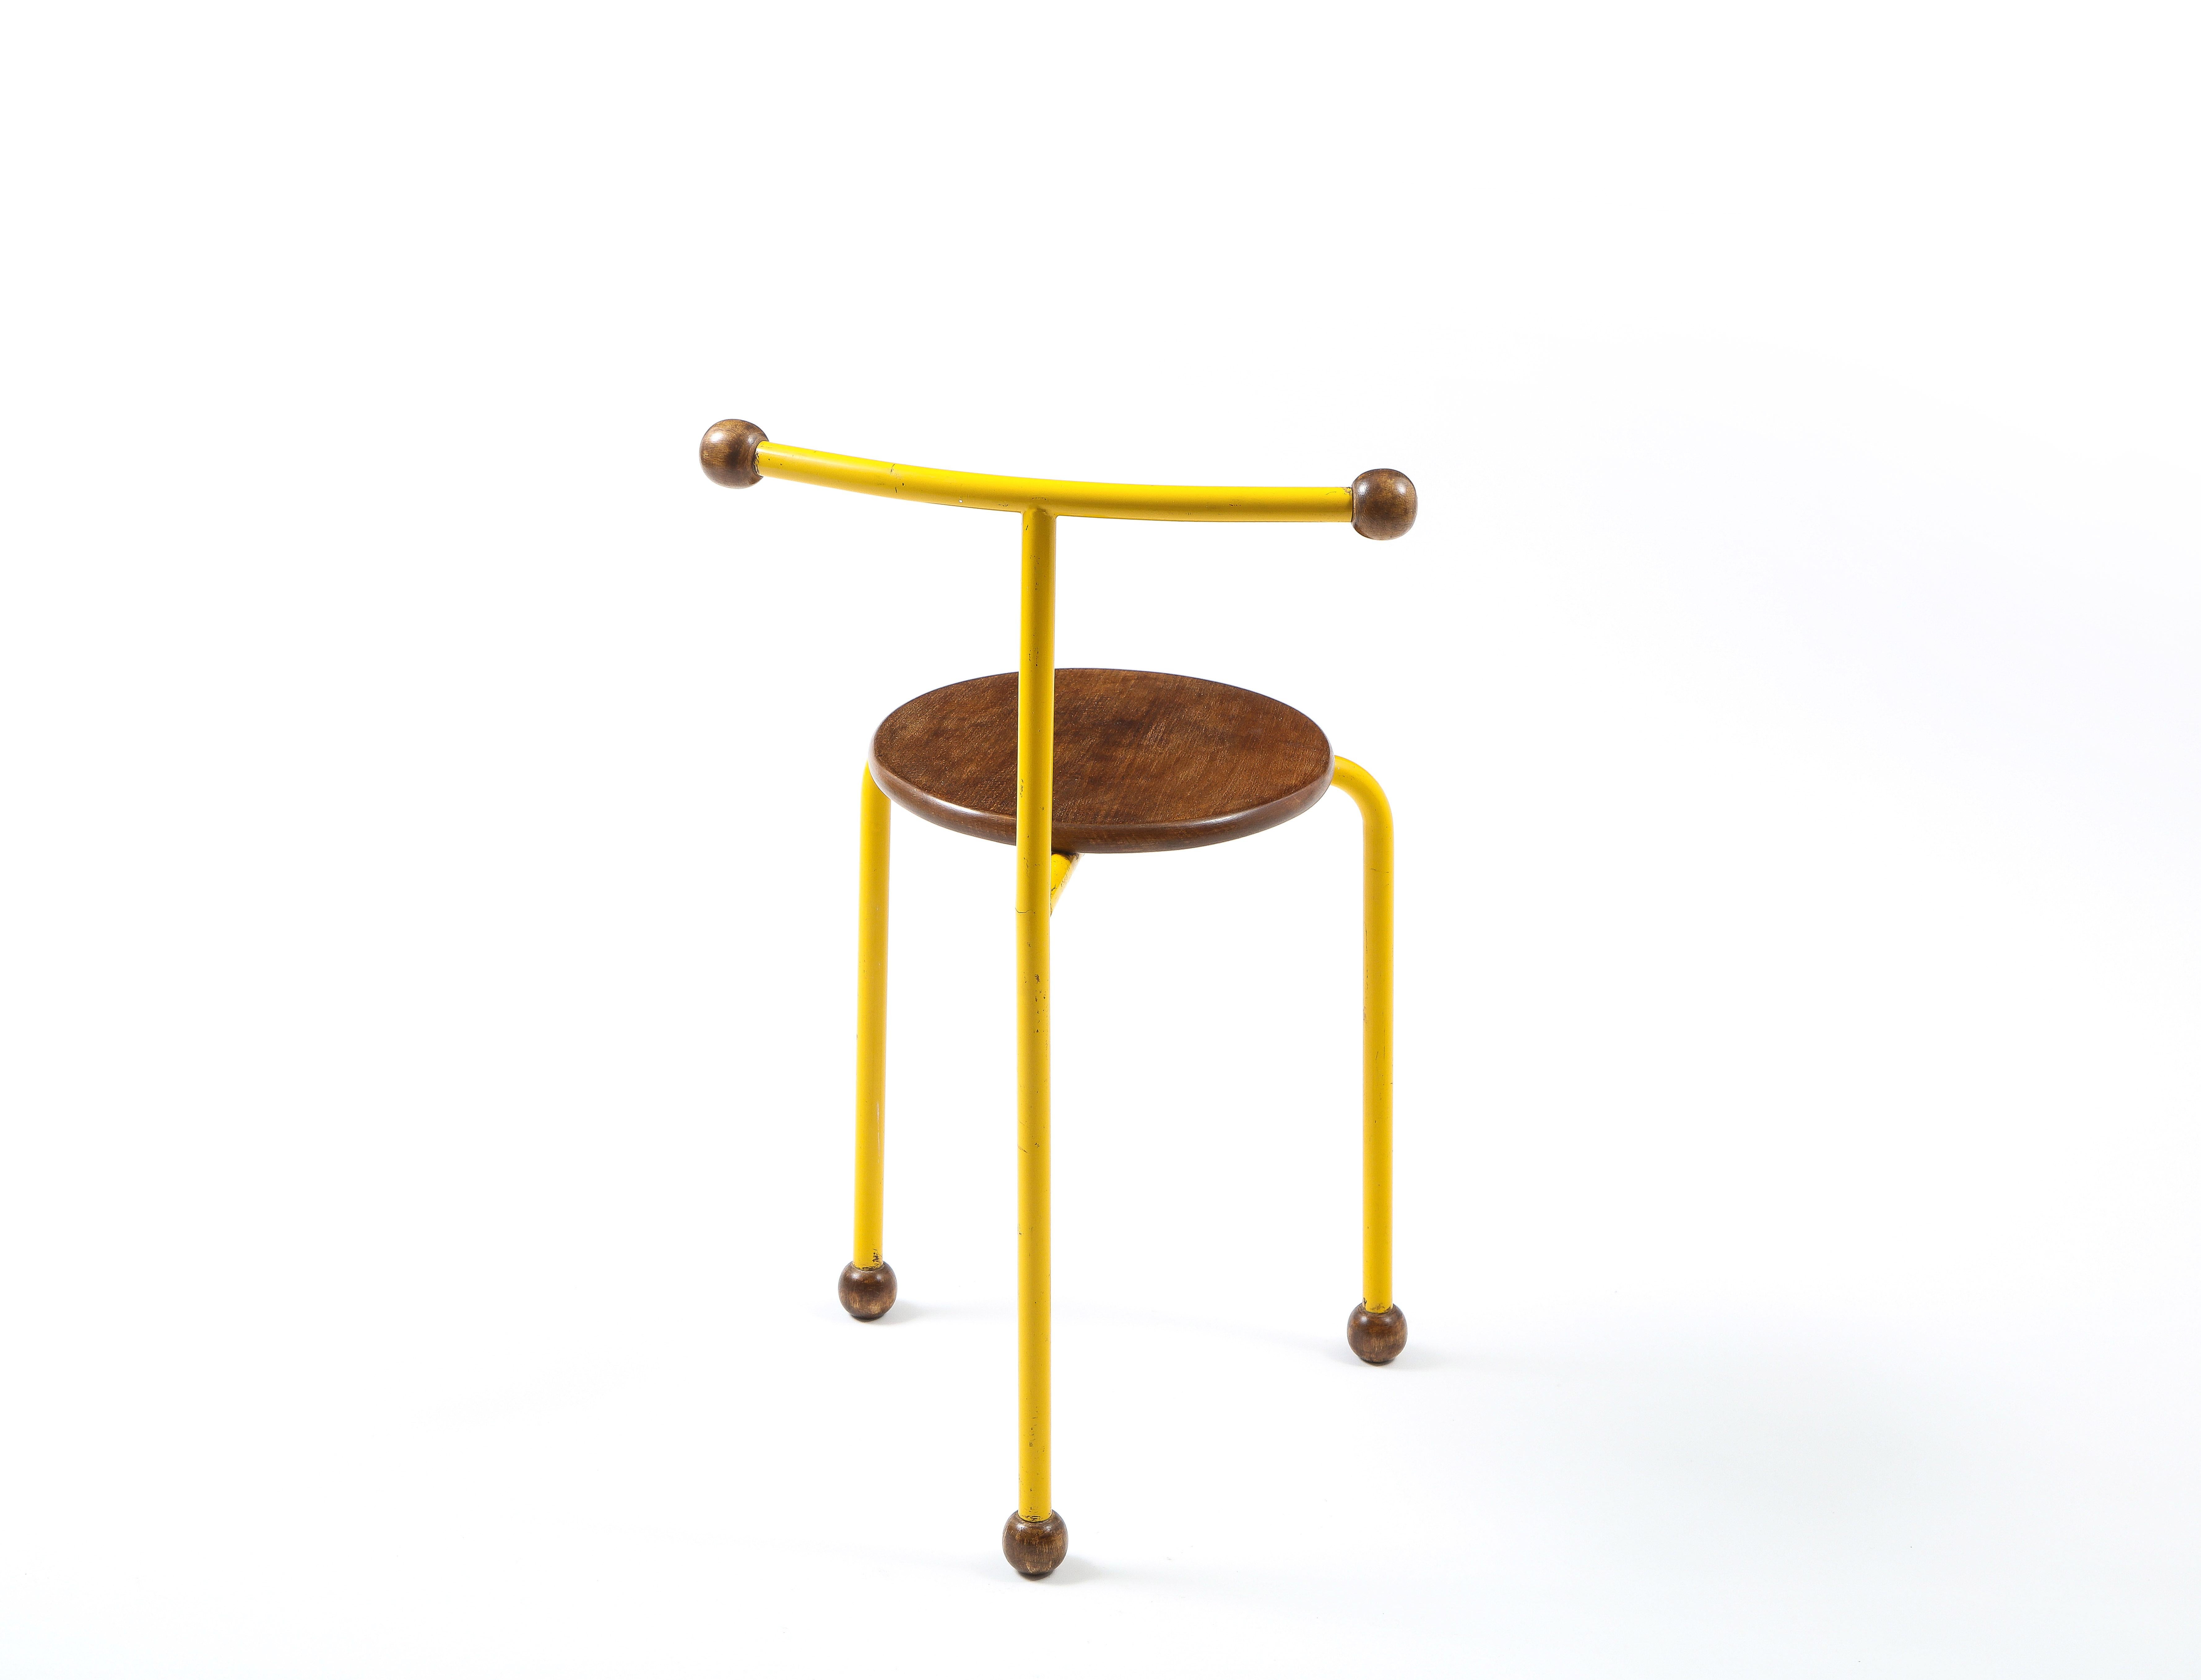 20th Century Post Modern Oak & Yellow Steel Small Sculptural Chair, France 1980's For Sale